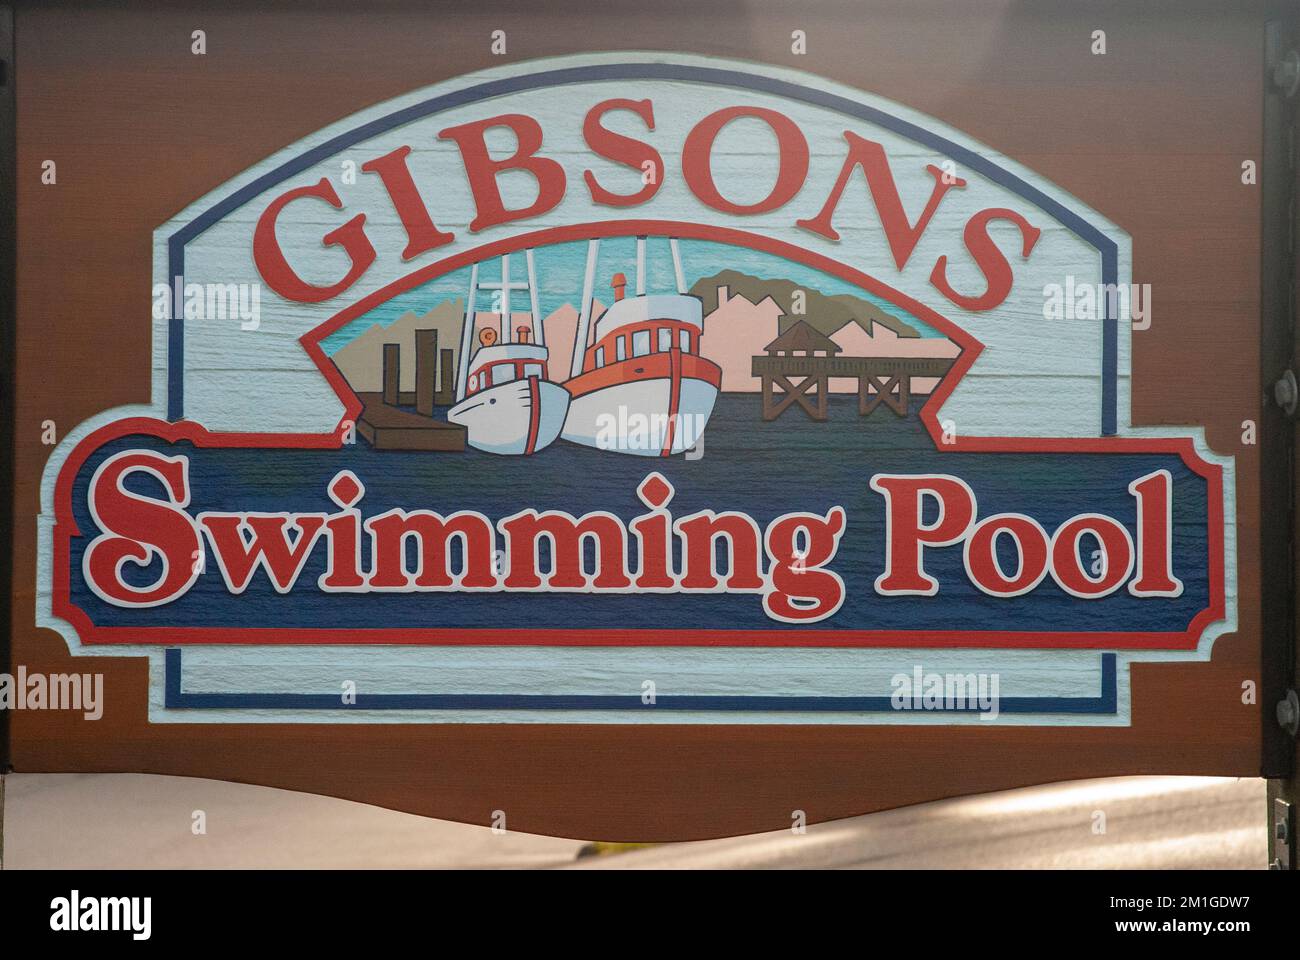 Gibsons Swimming Pool sign in Gibsons, British Columbia, Canada Stock Photo